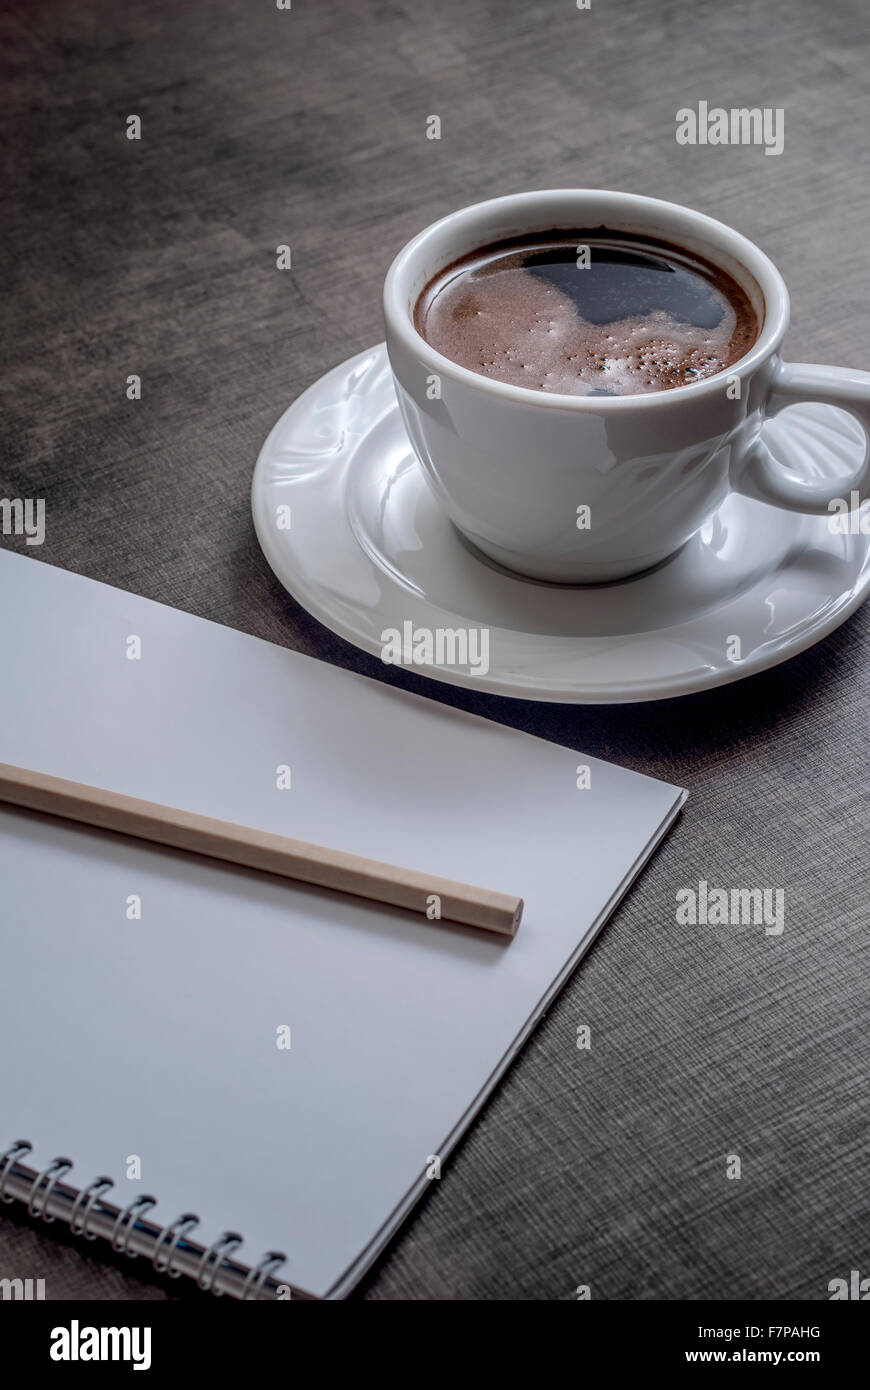 A blank white notebook and cup of coffee on the wooden table Stock Photo